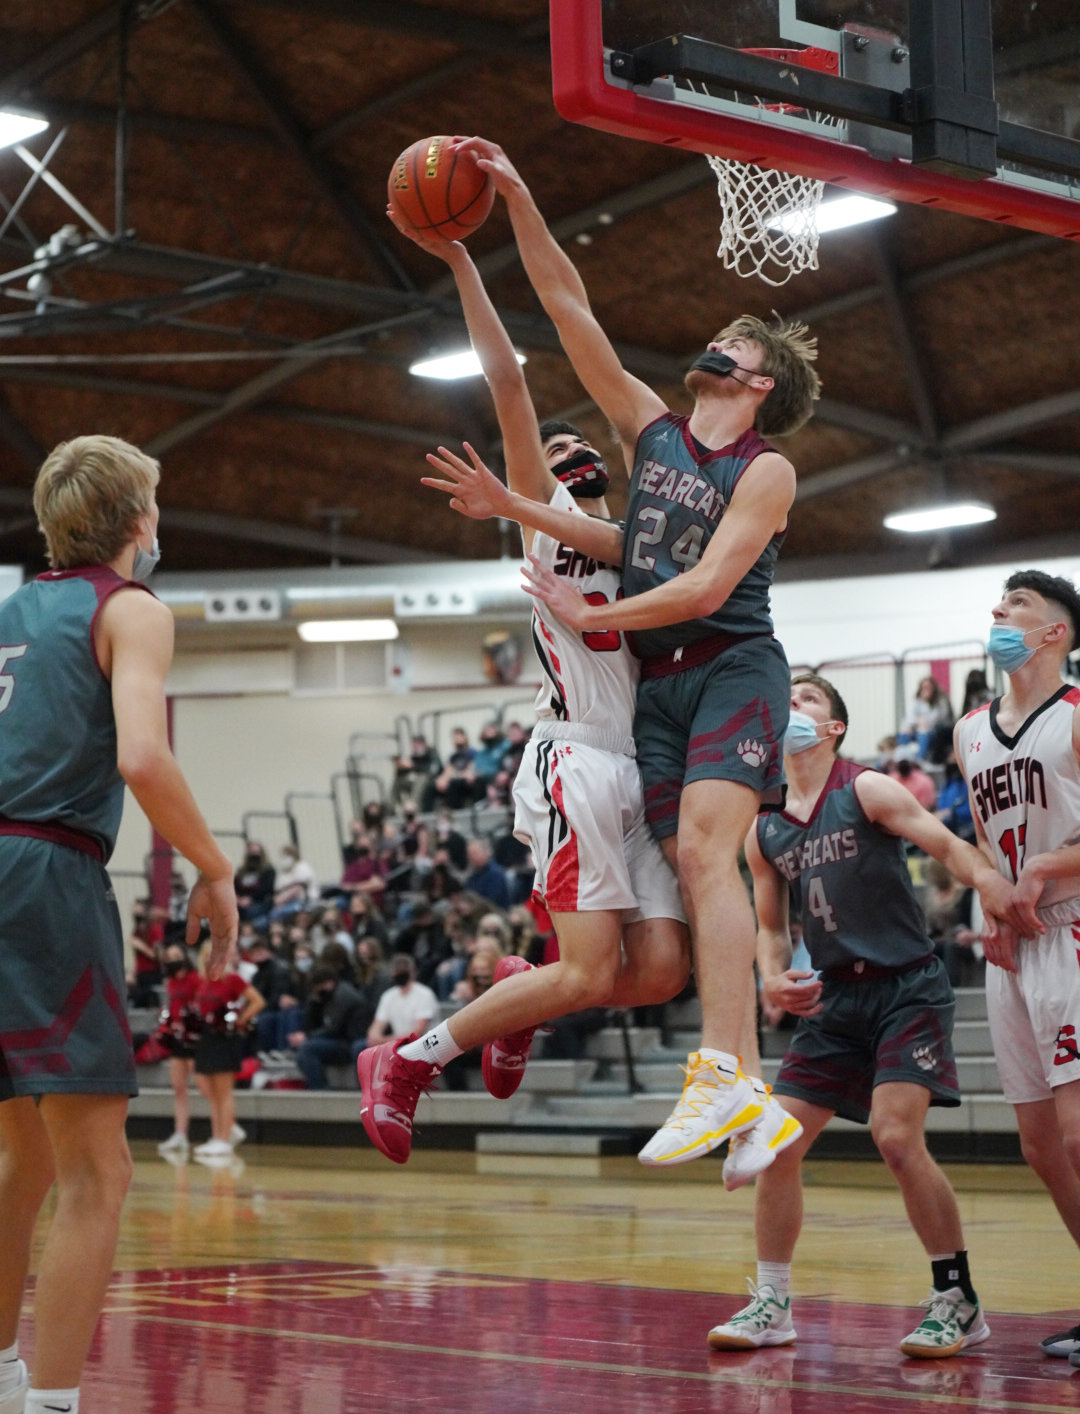 W.F. West senior Carter McCoy (24) blocks a Shelton shot during a road game on Wednesday.